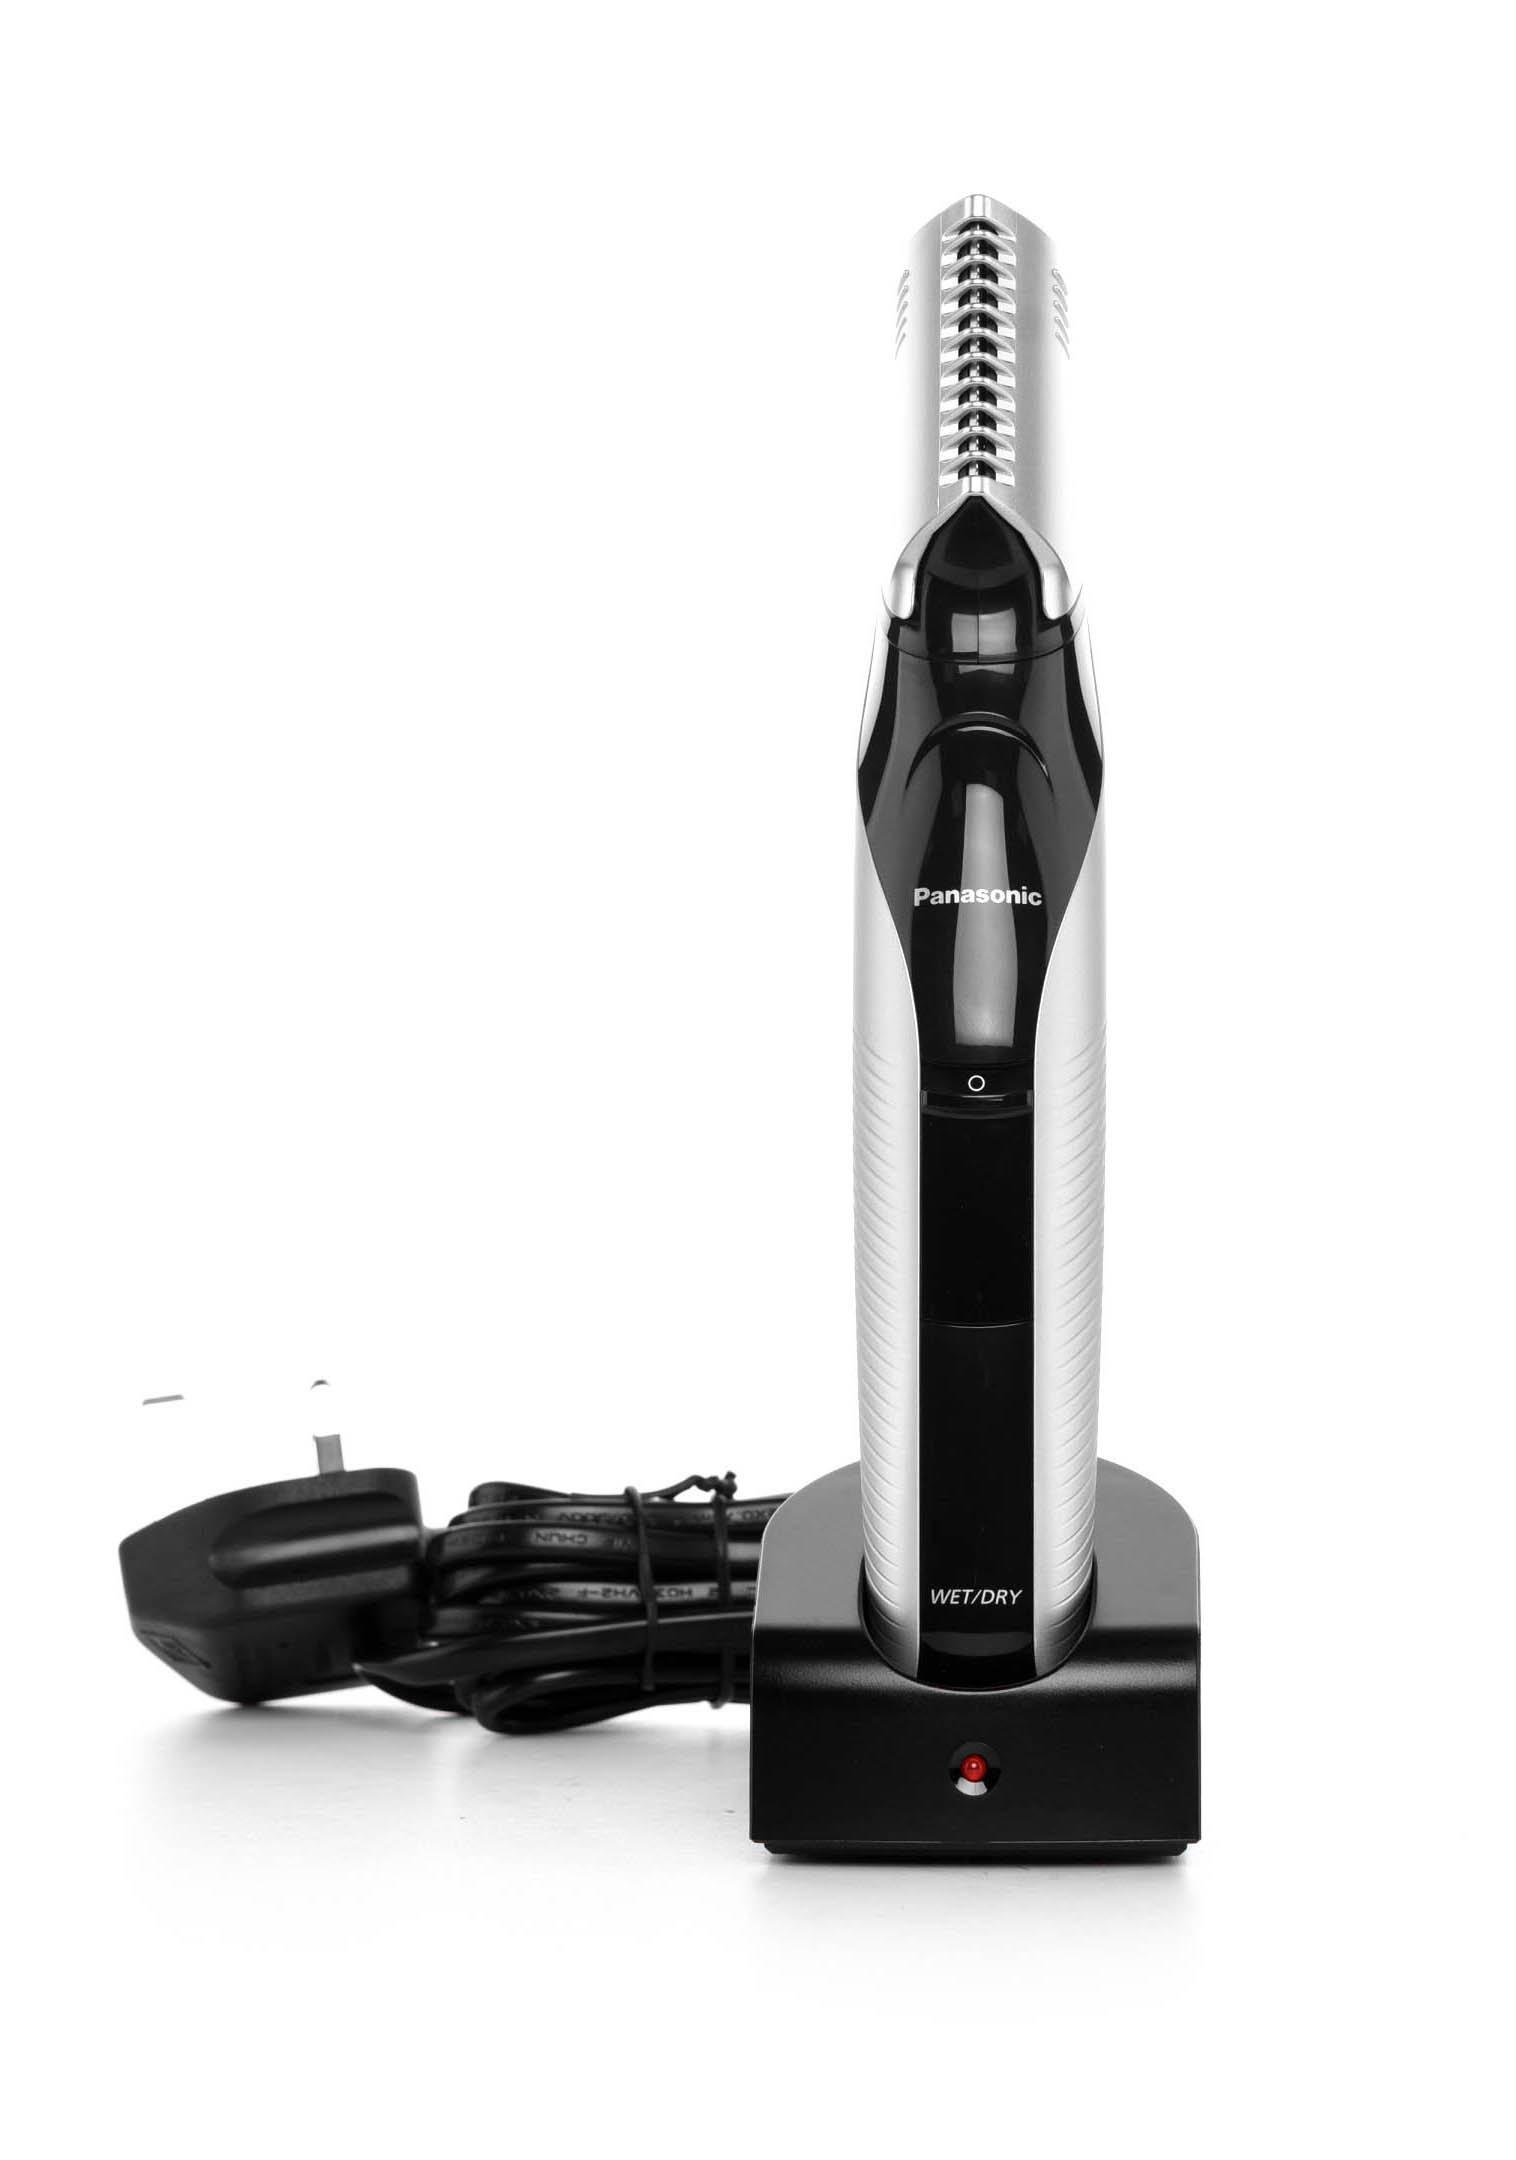 Panasonic I Shape Body Trimmer with a new technology and new shape 